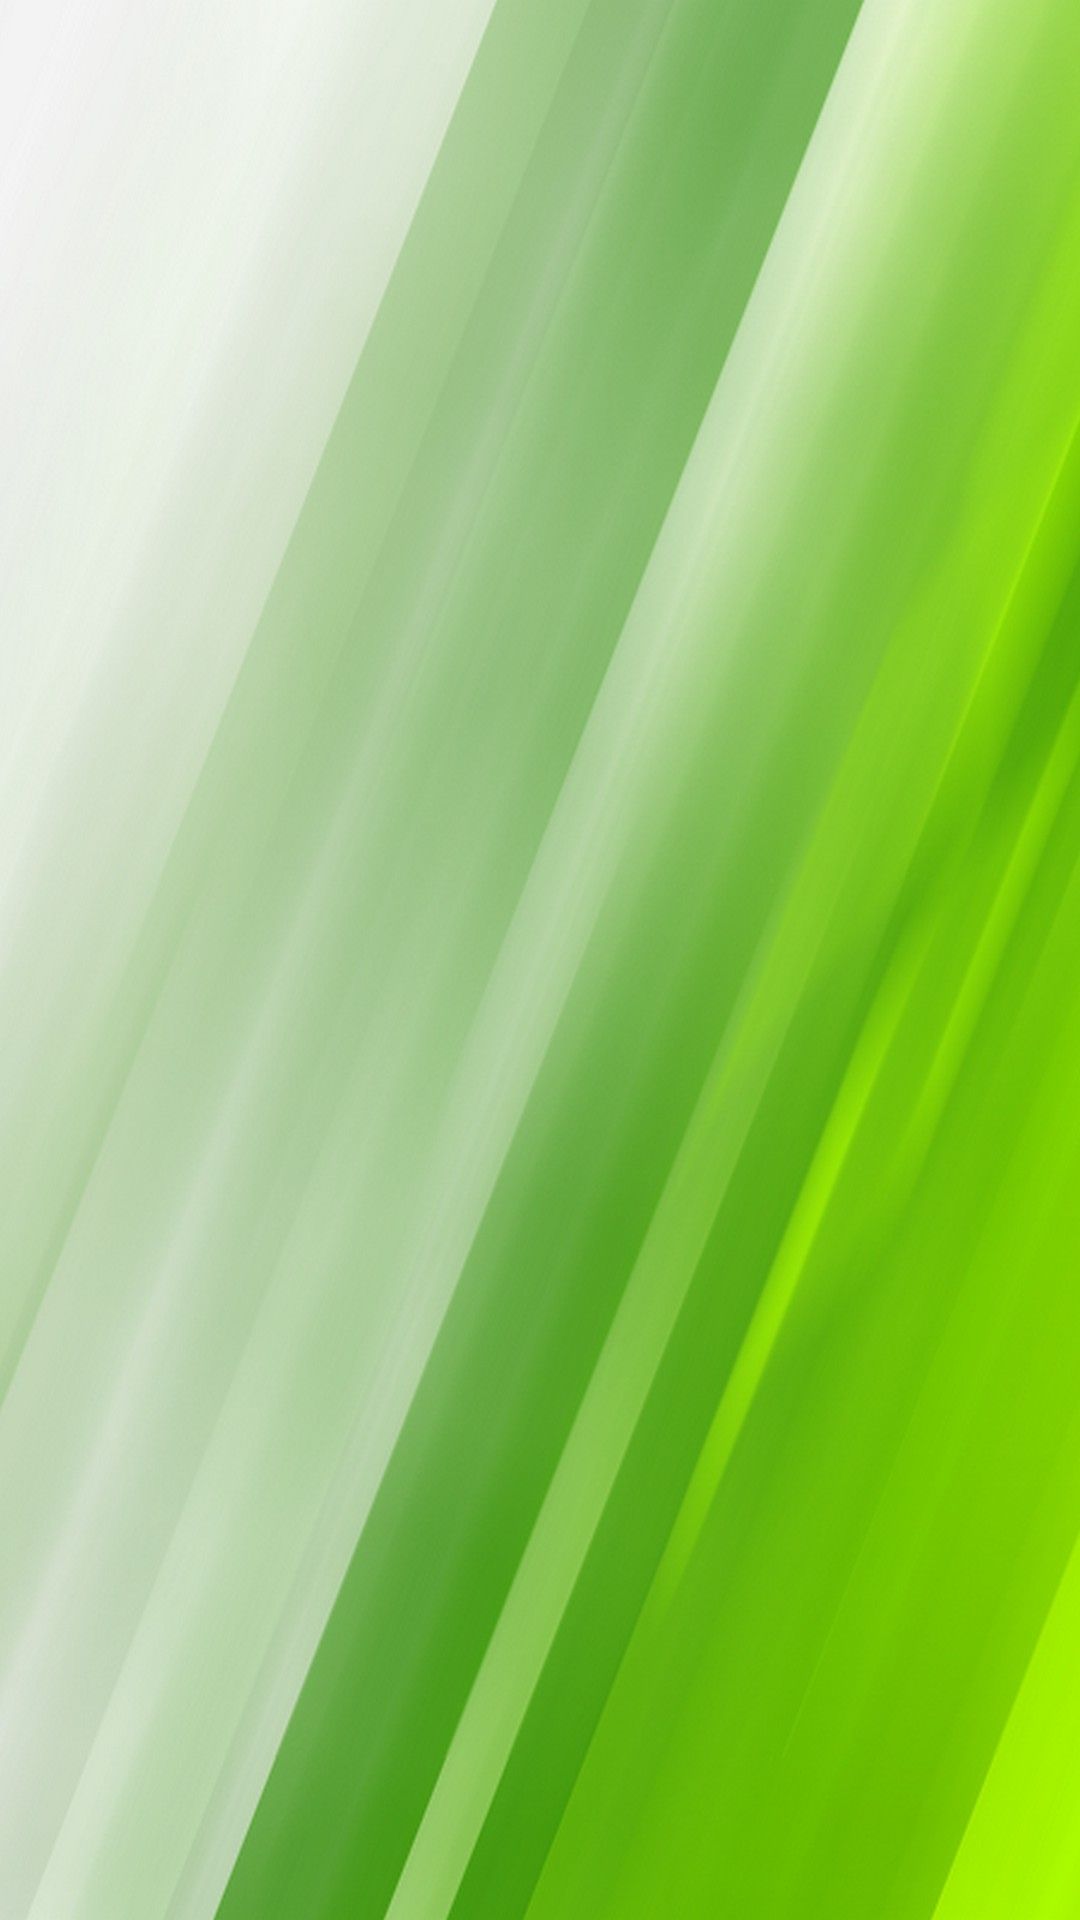 Green Colour Android Wallpaper Android Wallpaper